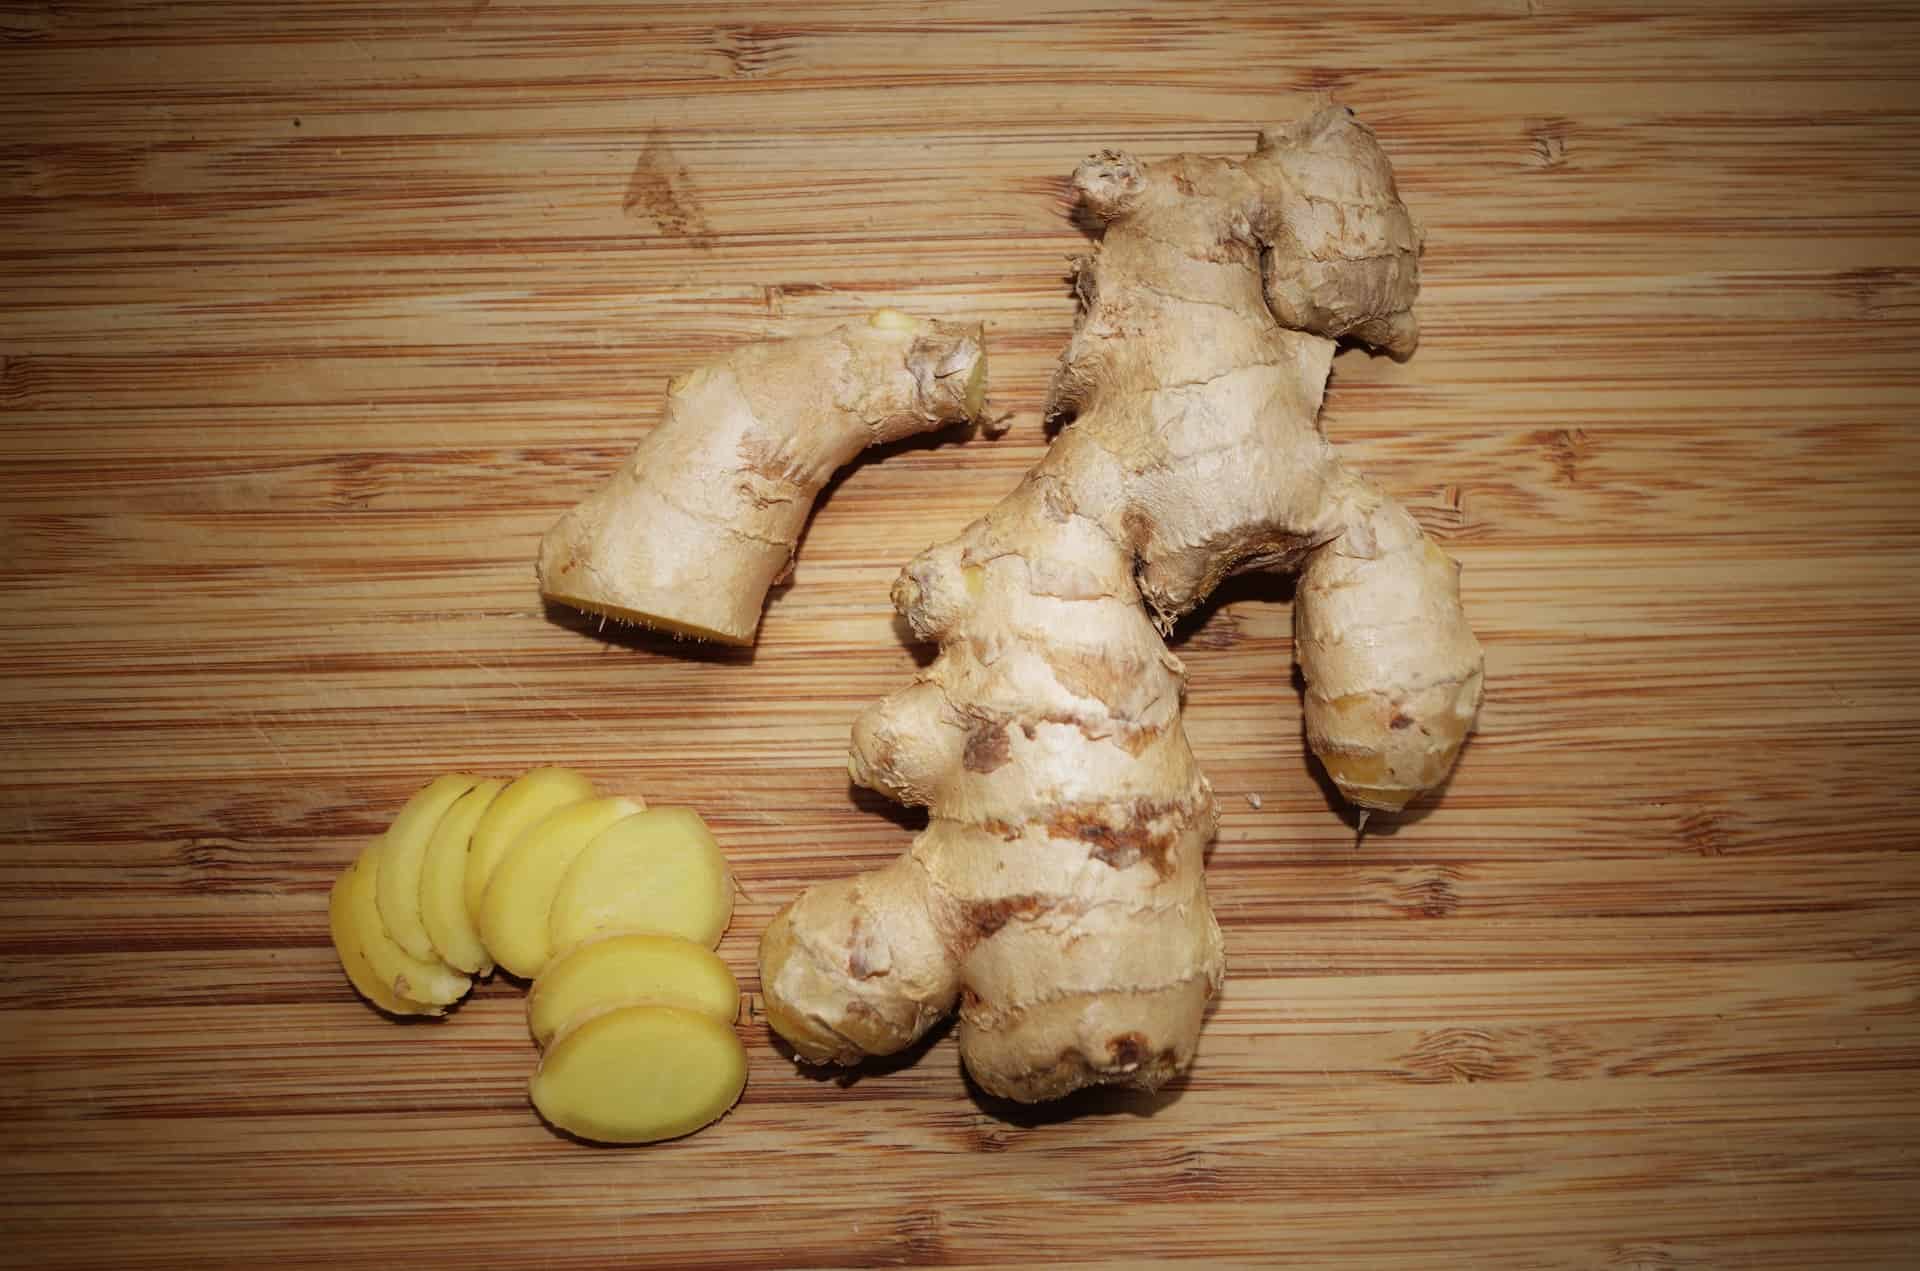 sliced up ginger on cutting board